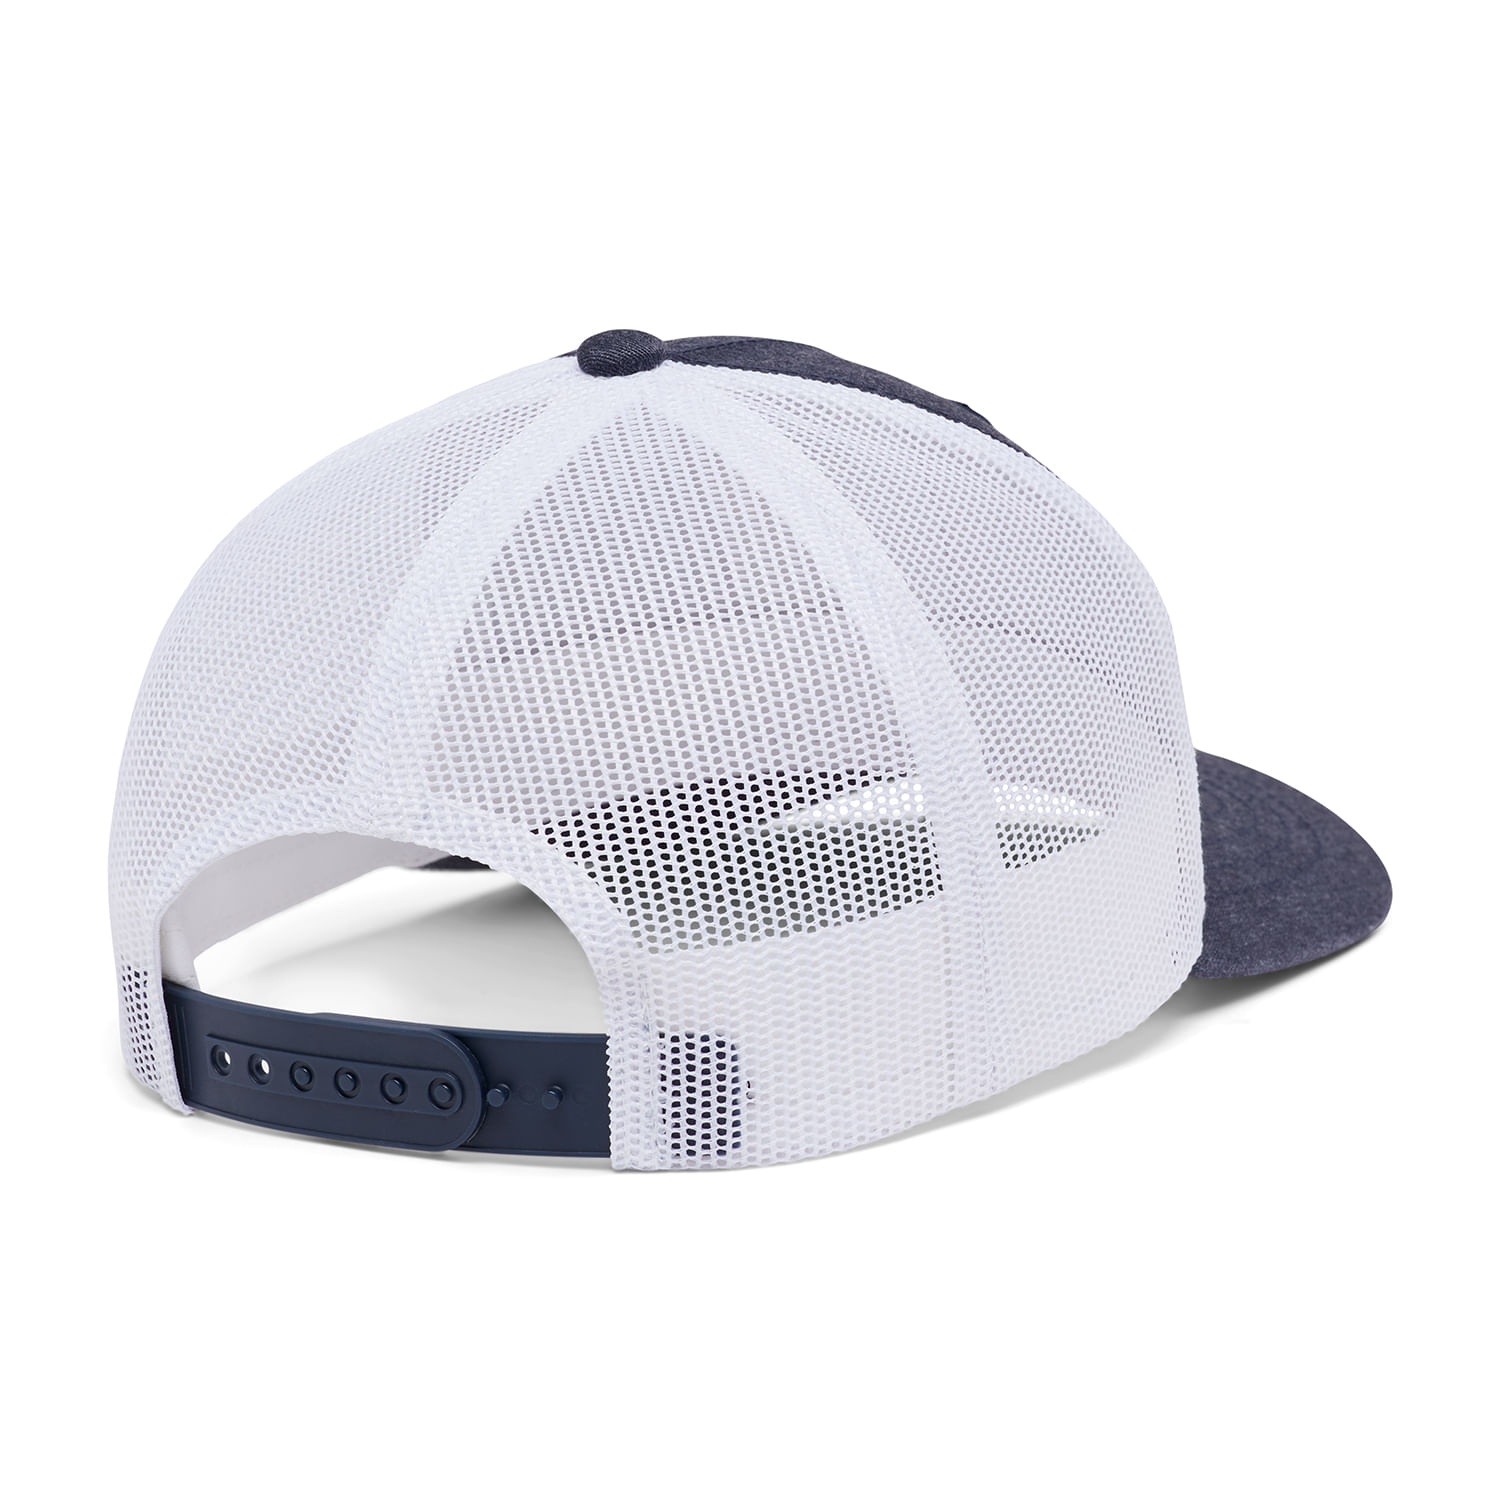 Columbia Youth Snap Back Hat